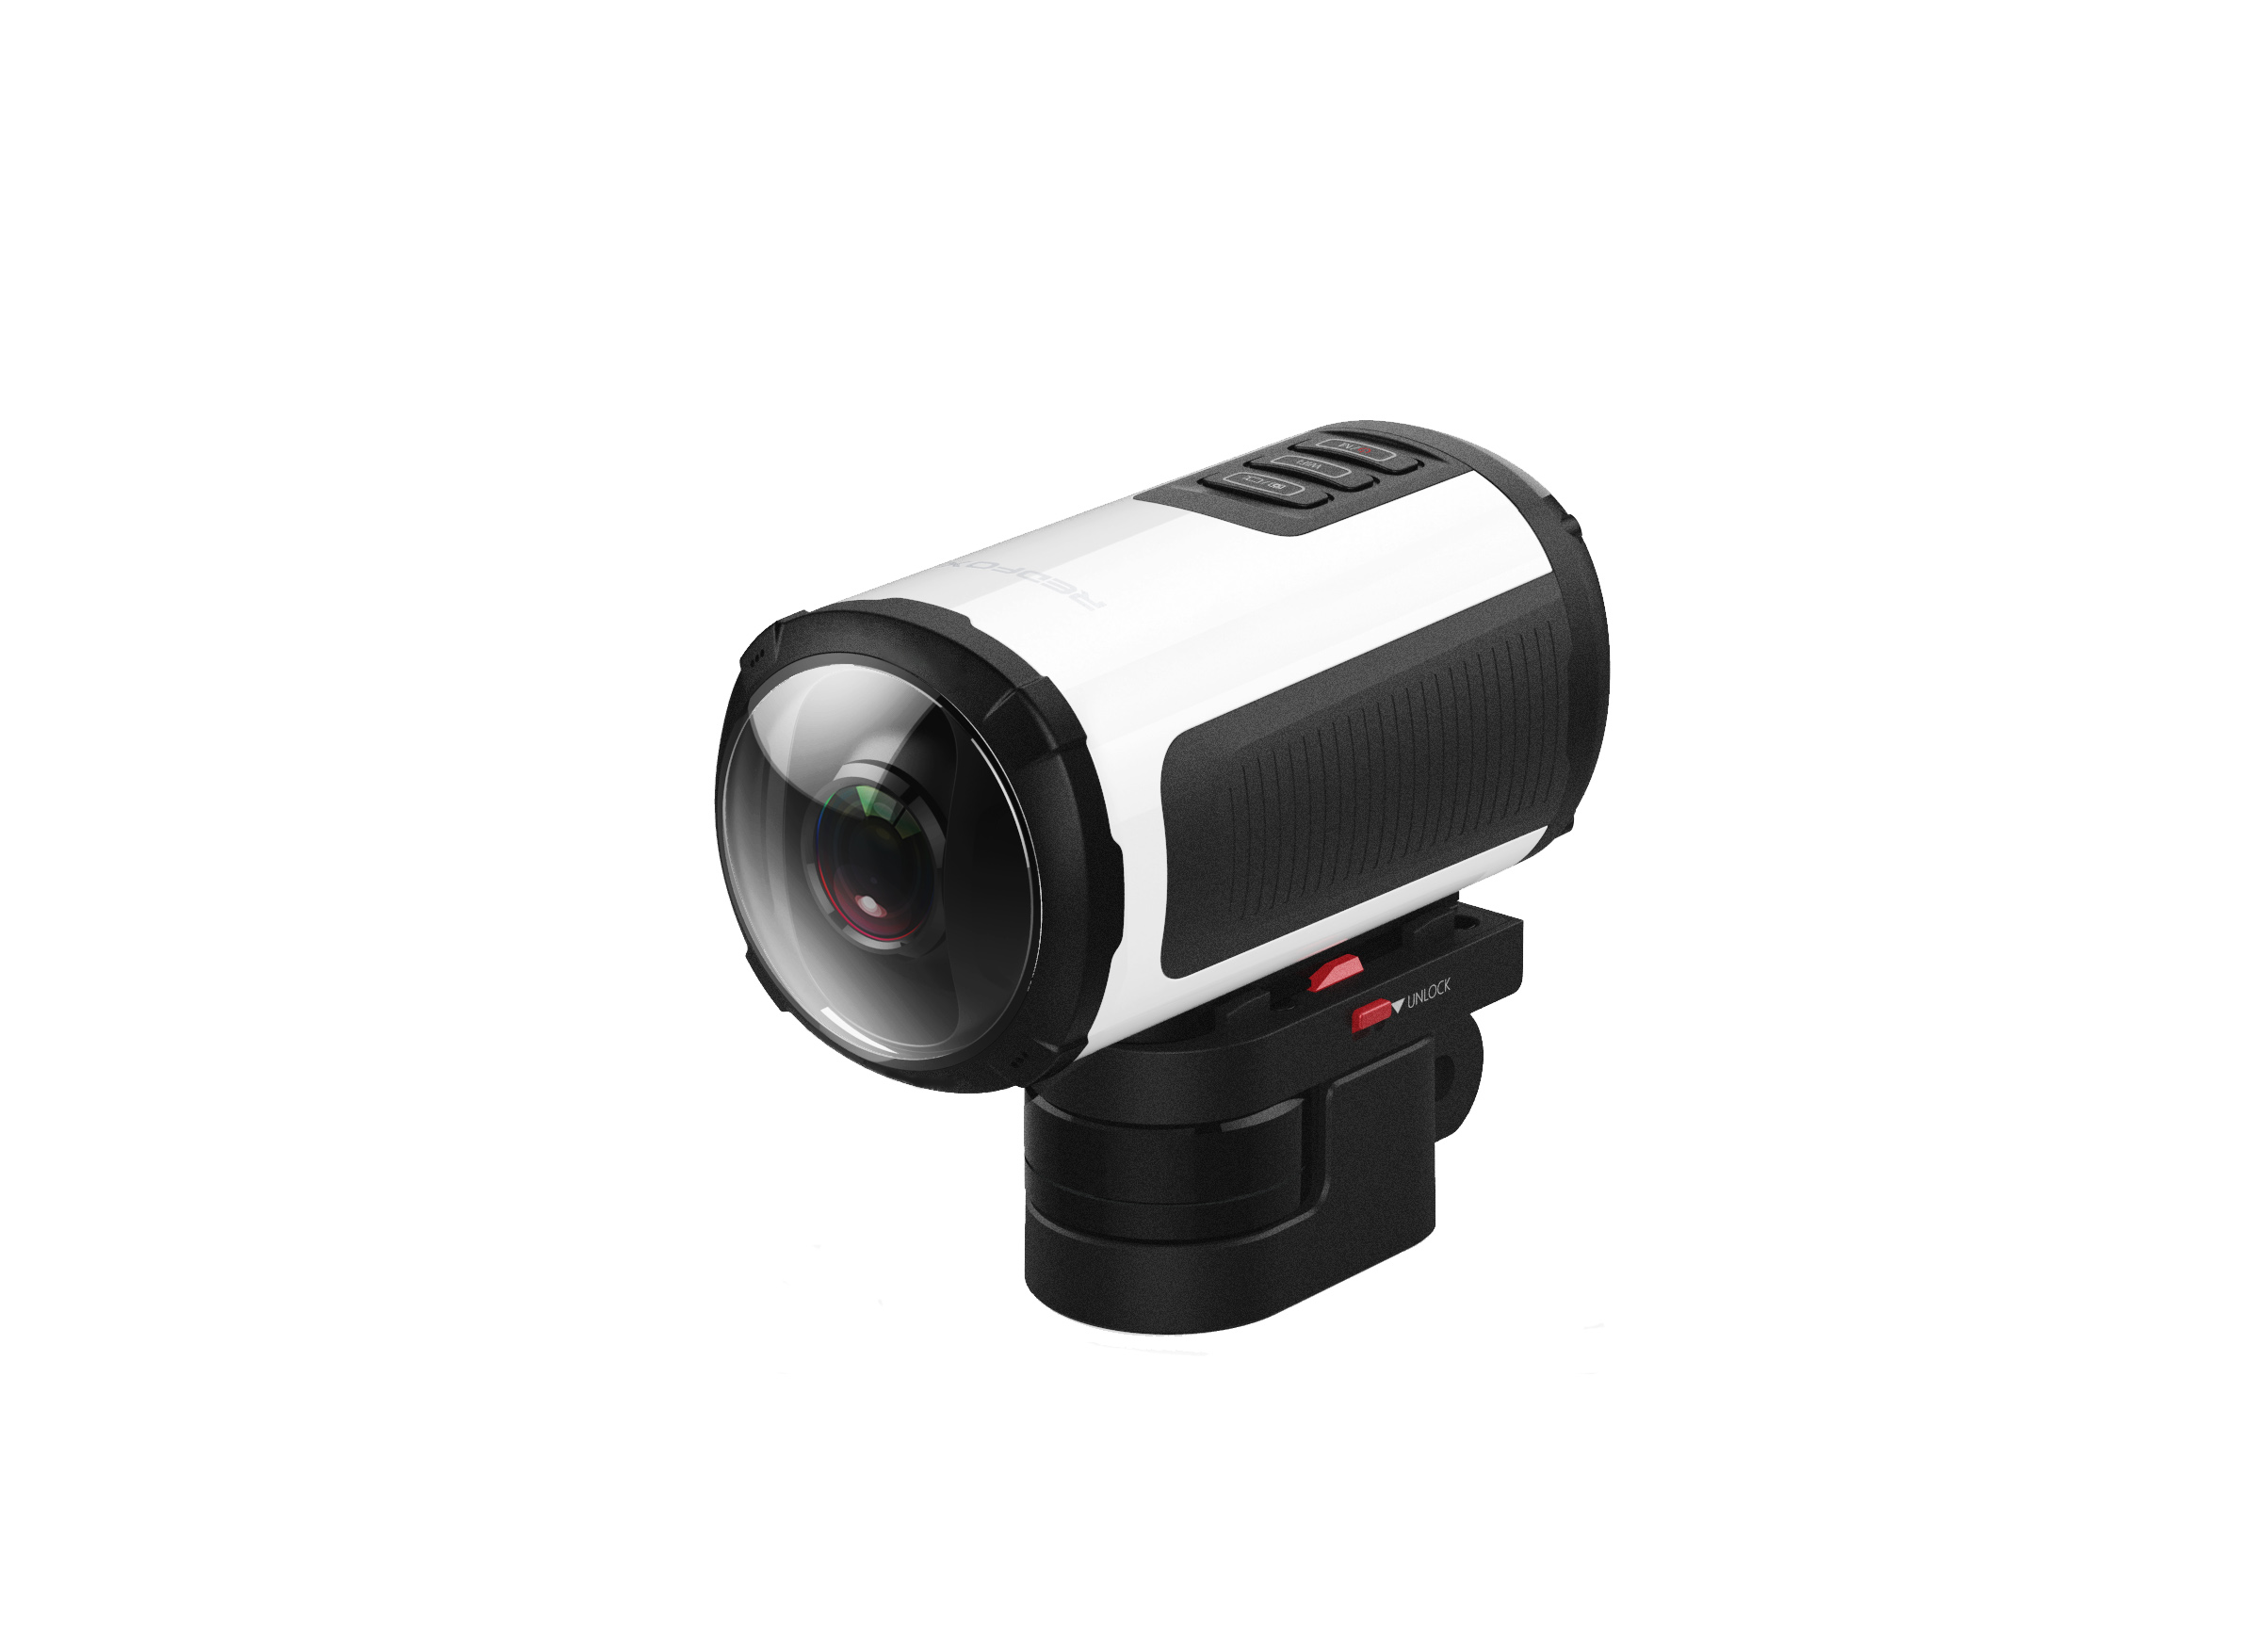 HD Pocket camera with built in gimbal